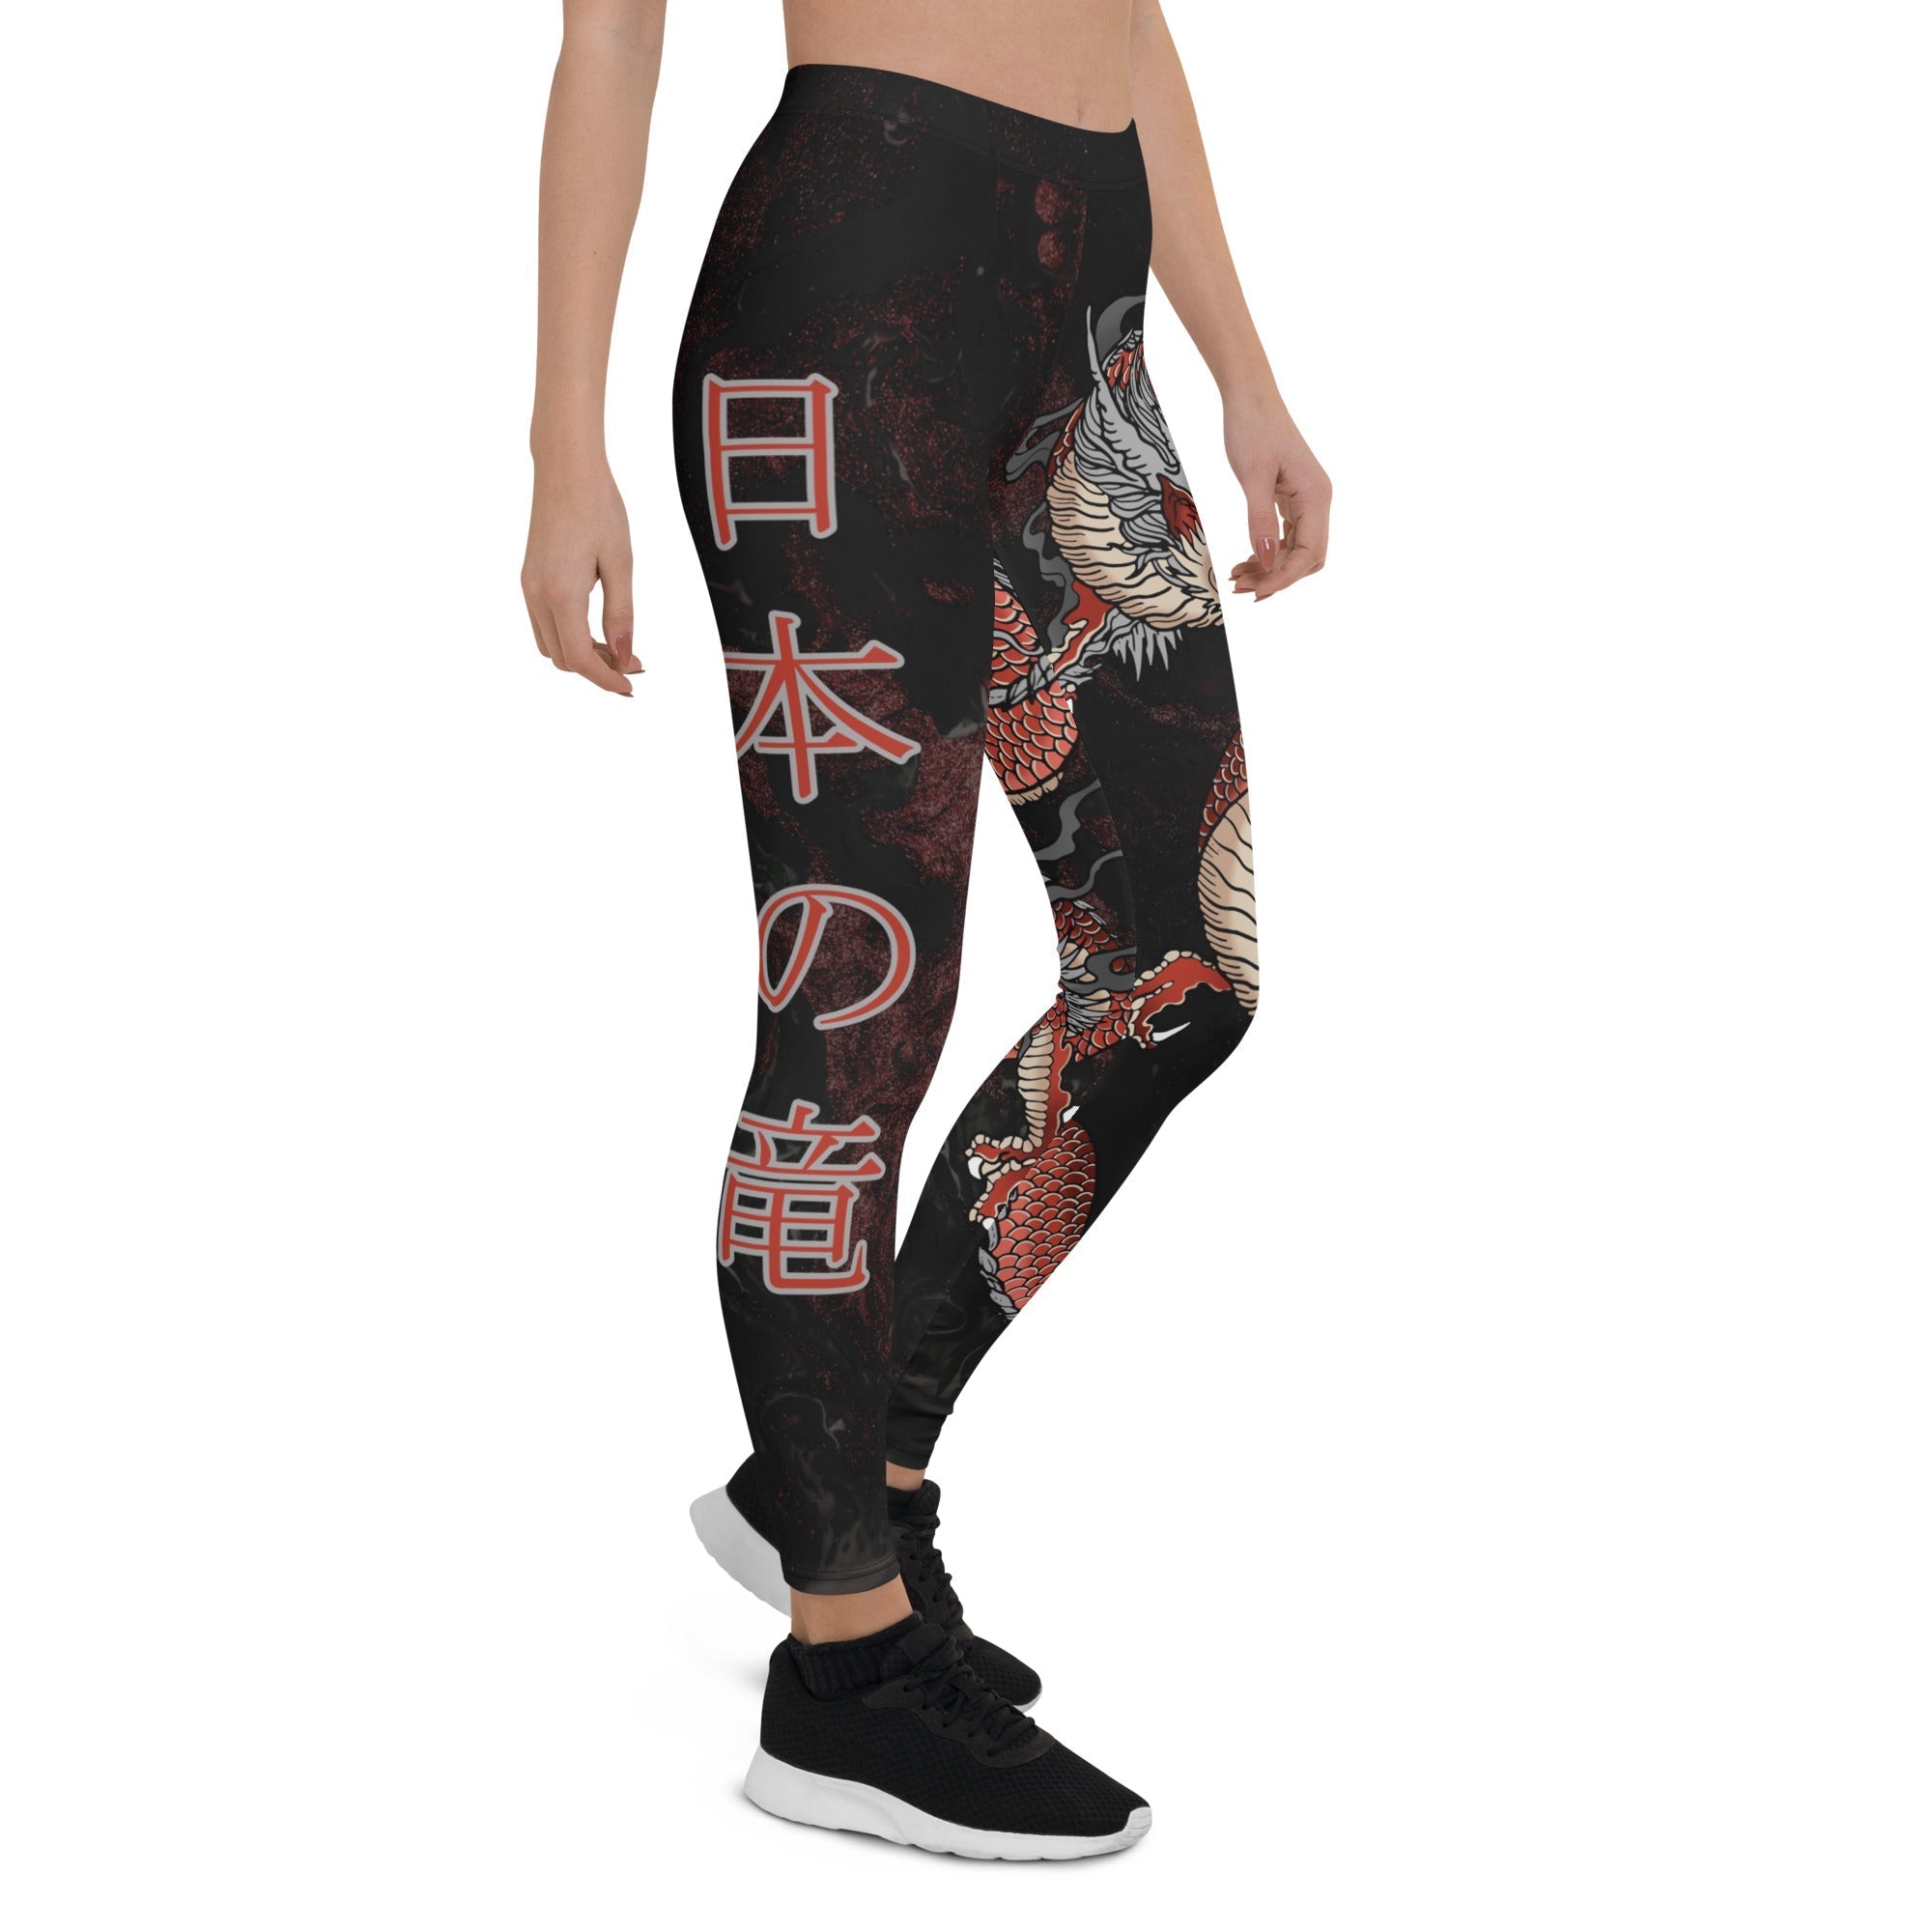 Gothic Dragon 3D Printed Tank Top+Legging Combo Outfit Yoga